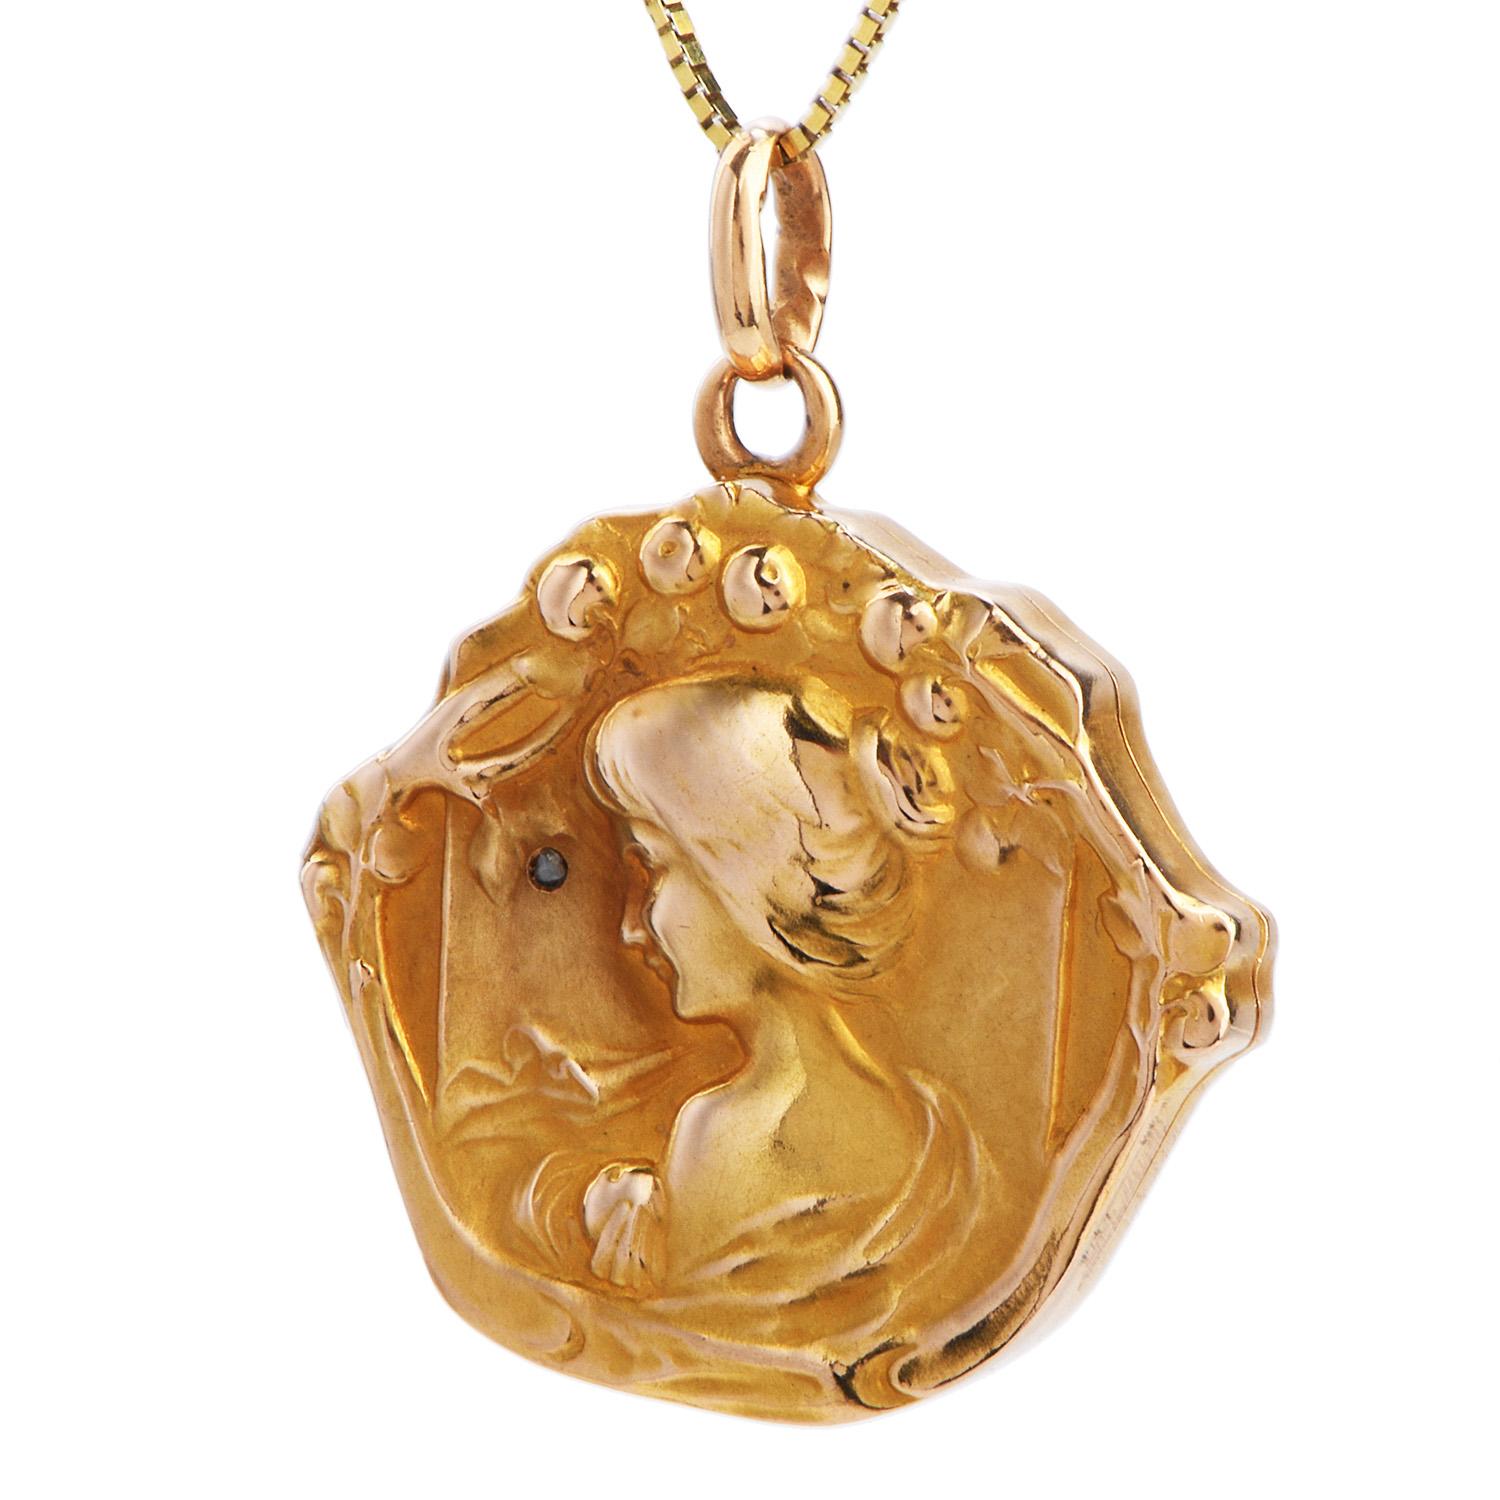 This antique art nouveau locket pendant* of highly ornate aesthetic is crafted in a combination of 18 karat yellow gold, weighing 7.2 grams and measuring 30mm long (Including bale) and 25mm  wide. The oval-shaped locket exposes a central décor of a